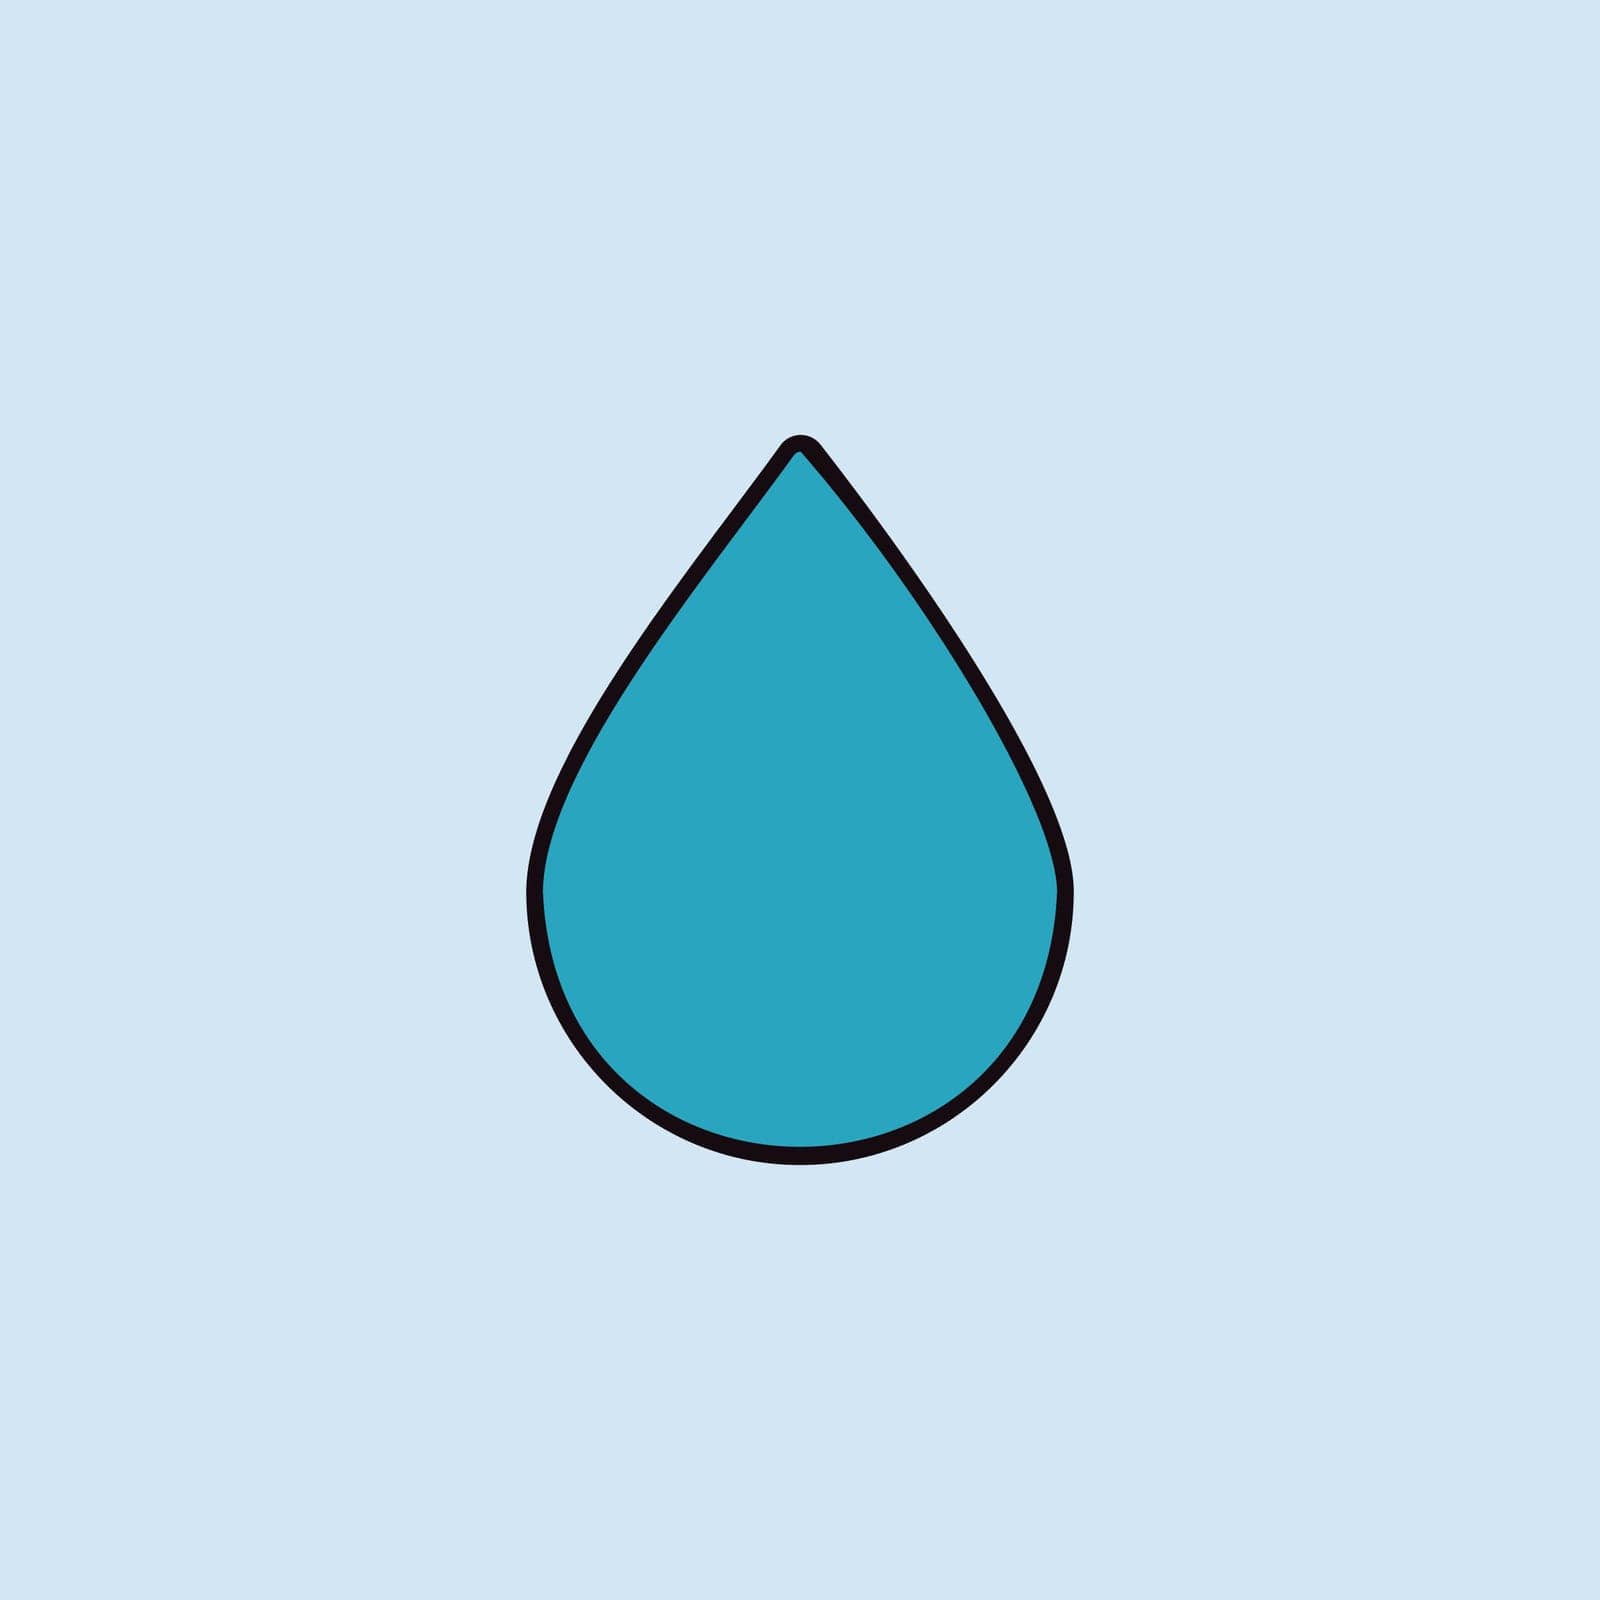 Drop water vector icon. Meteorology sign. Graph symbol for travel, tourism and weather web site and apps design, logo, app, UI